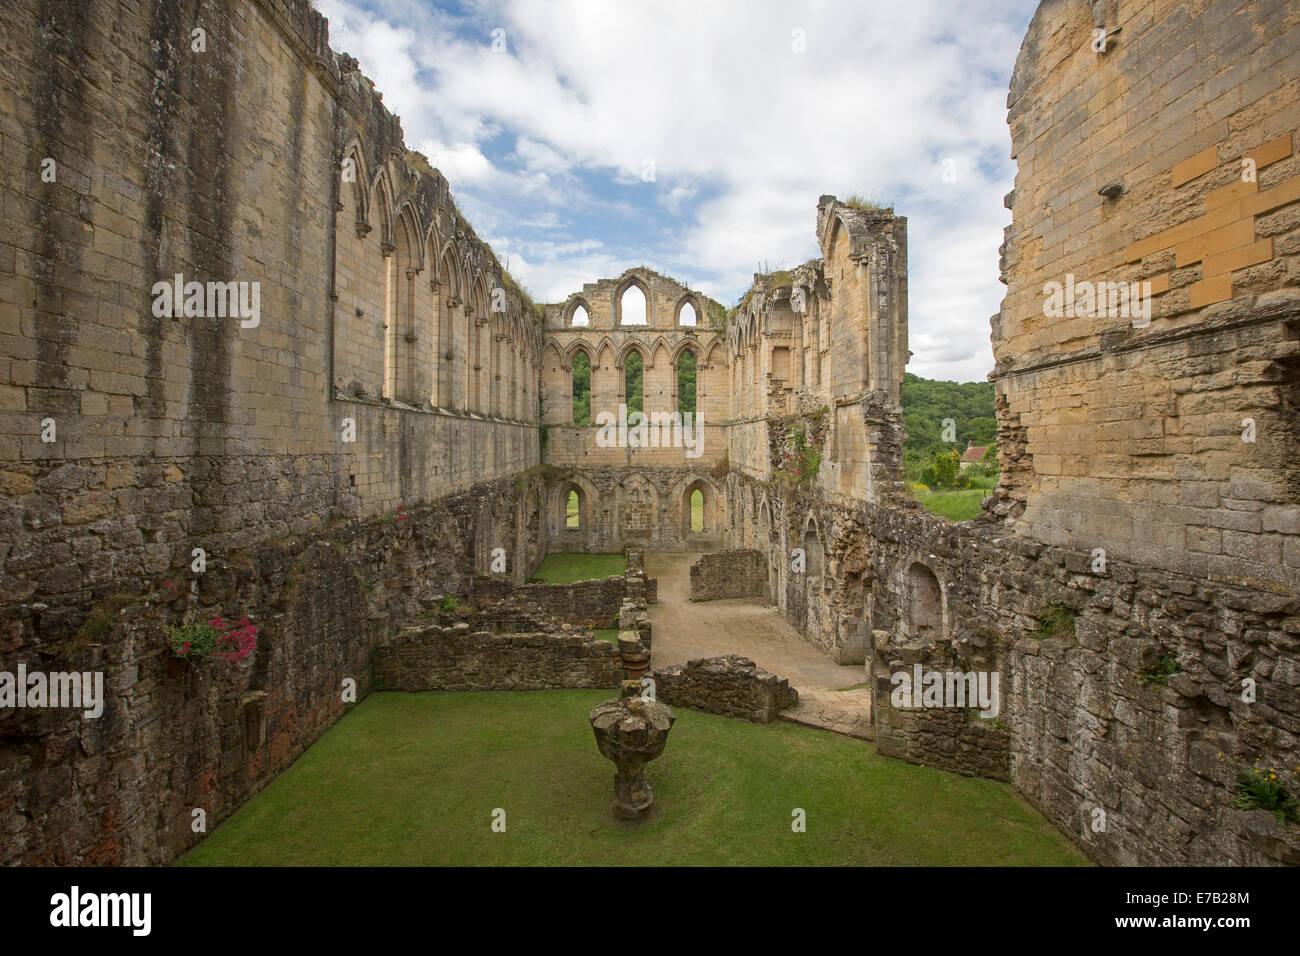 Interior view of picturesque ruins of historic Rievaulx abbey, 12th century Cistercian monastery in Yorkshire, England Stock Photo